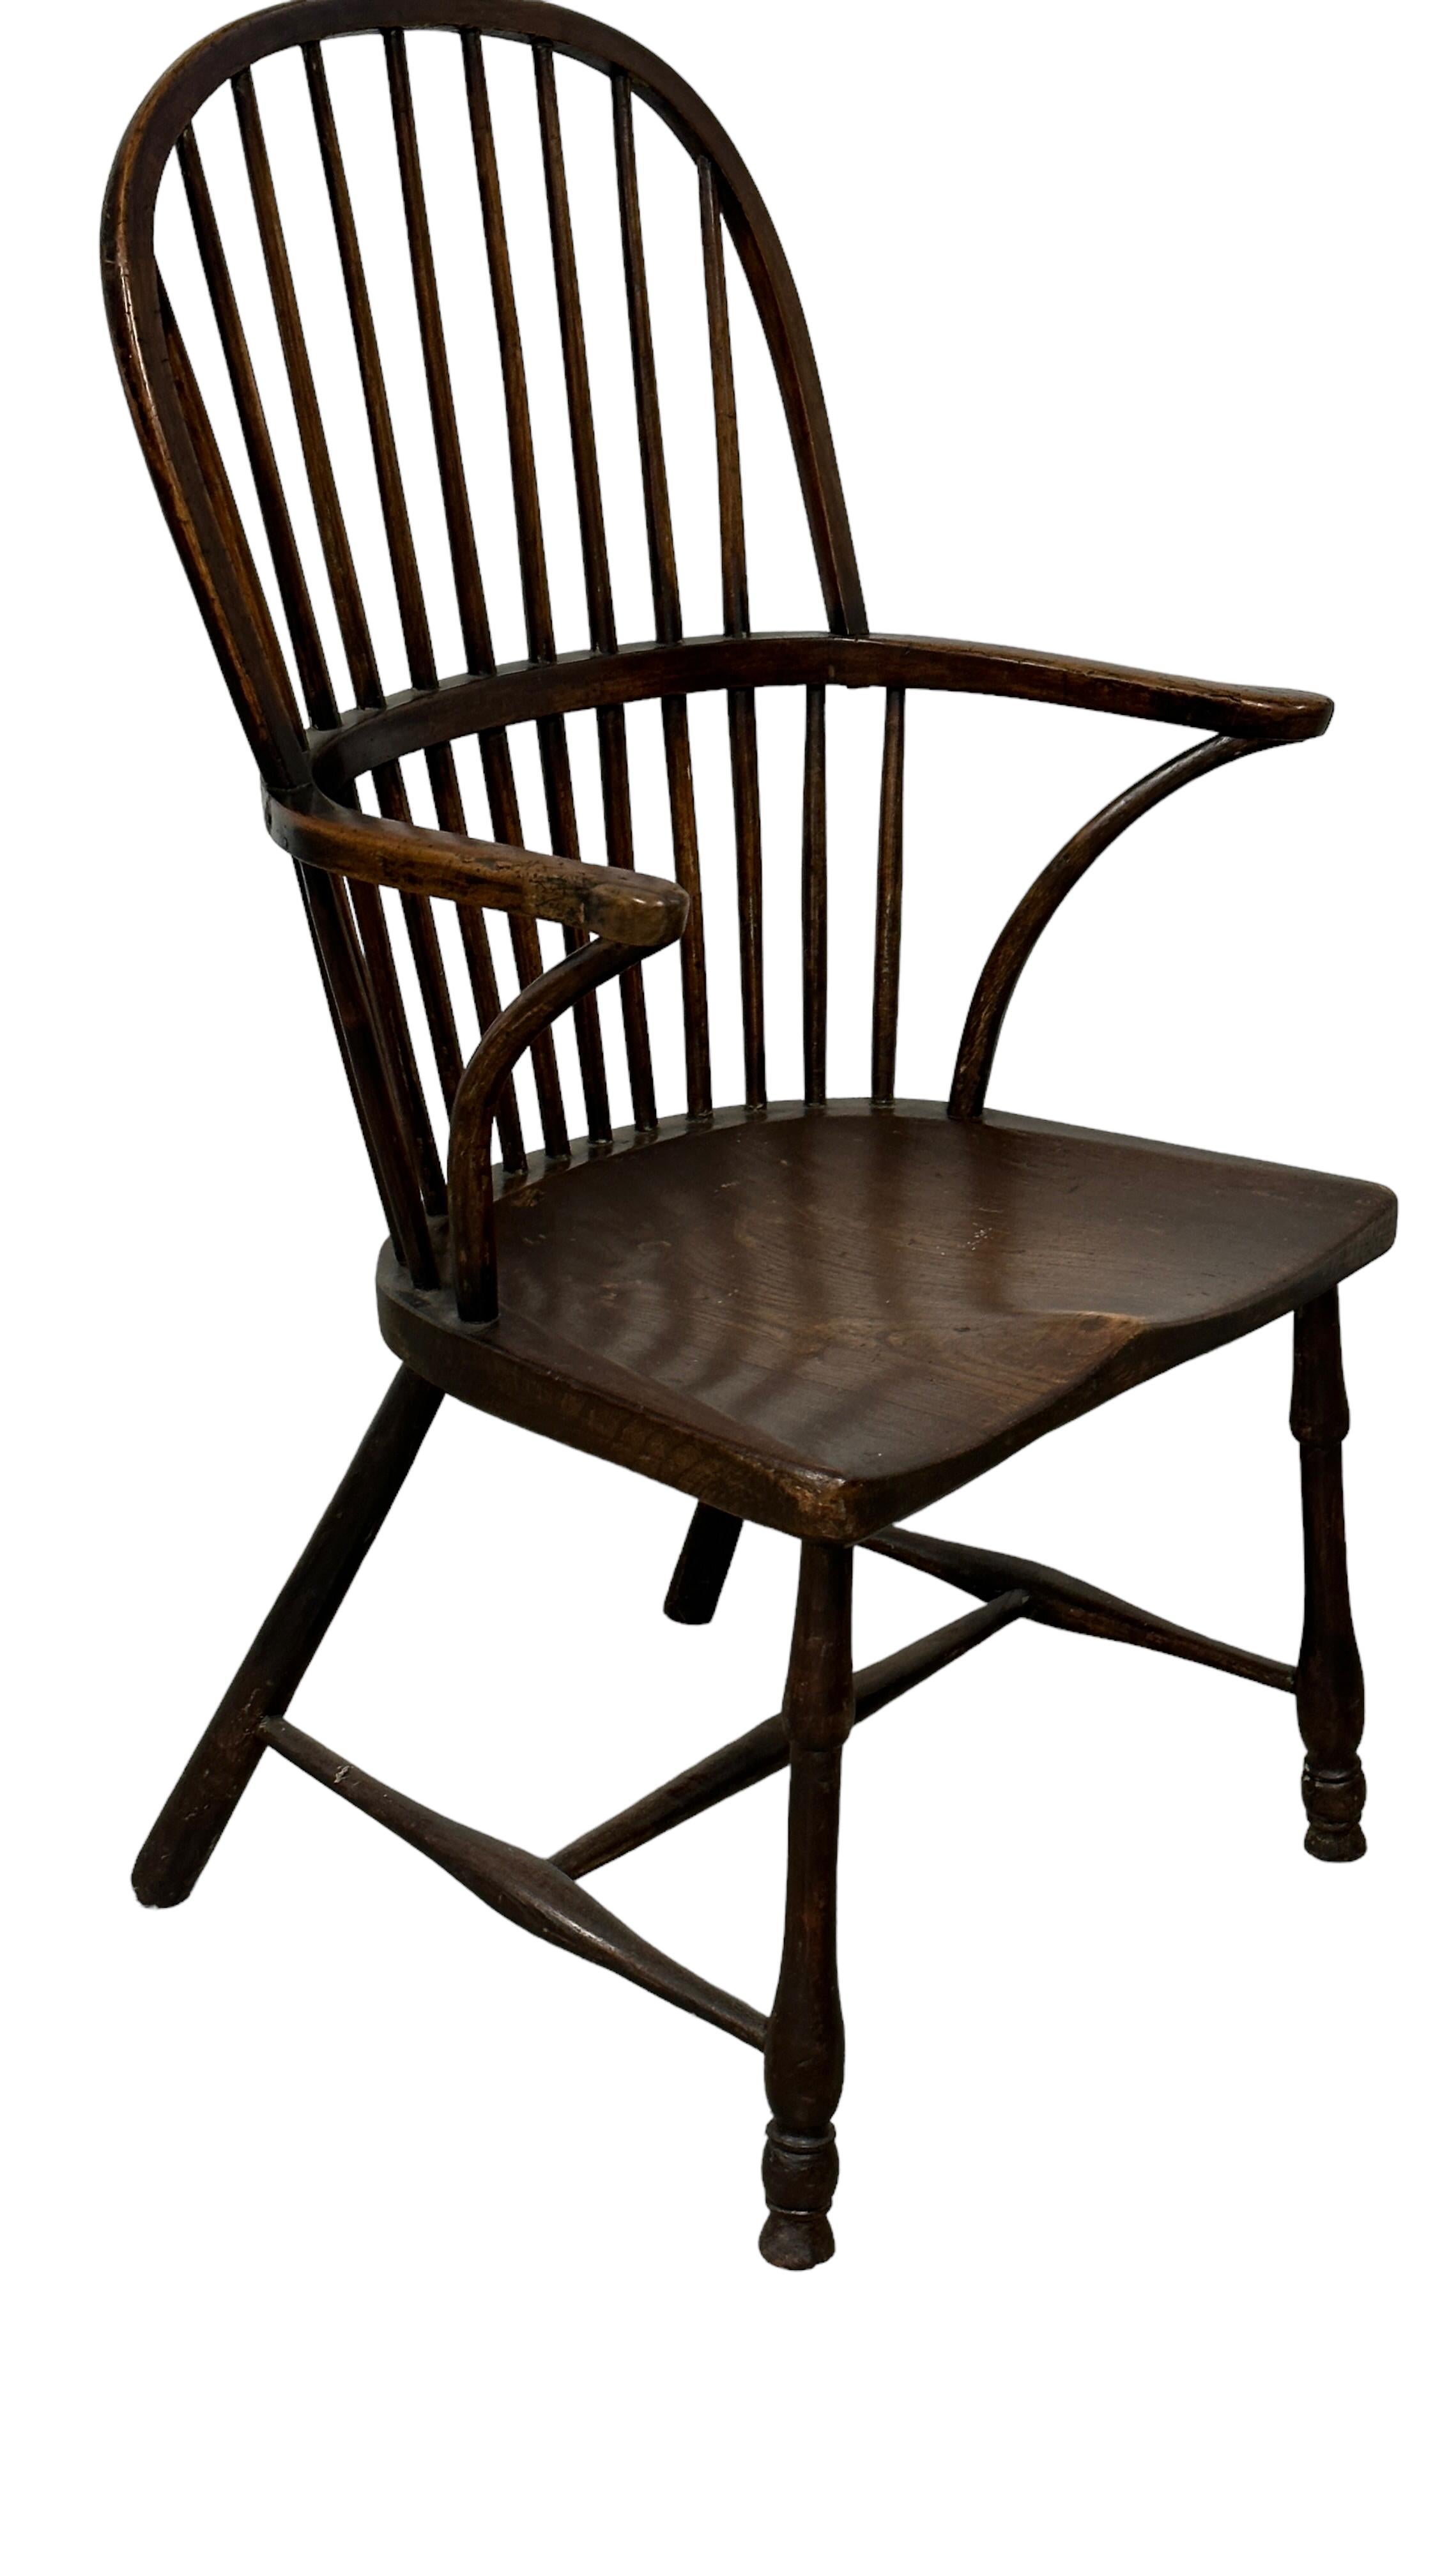 Beautiful Antique Windsor Wooden Chair, 19th Century, England 3